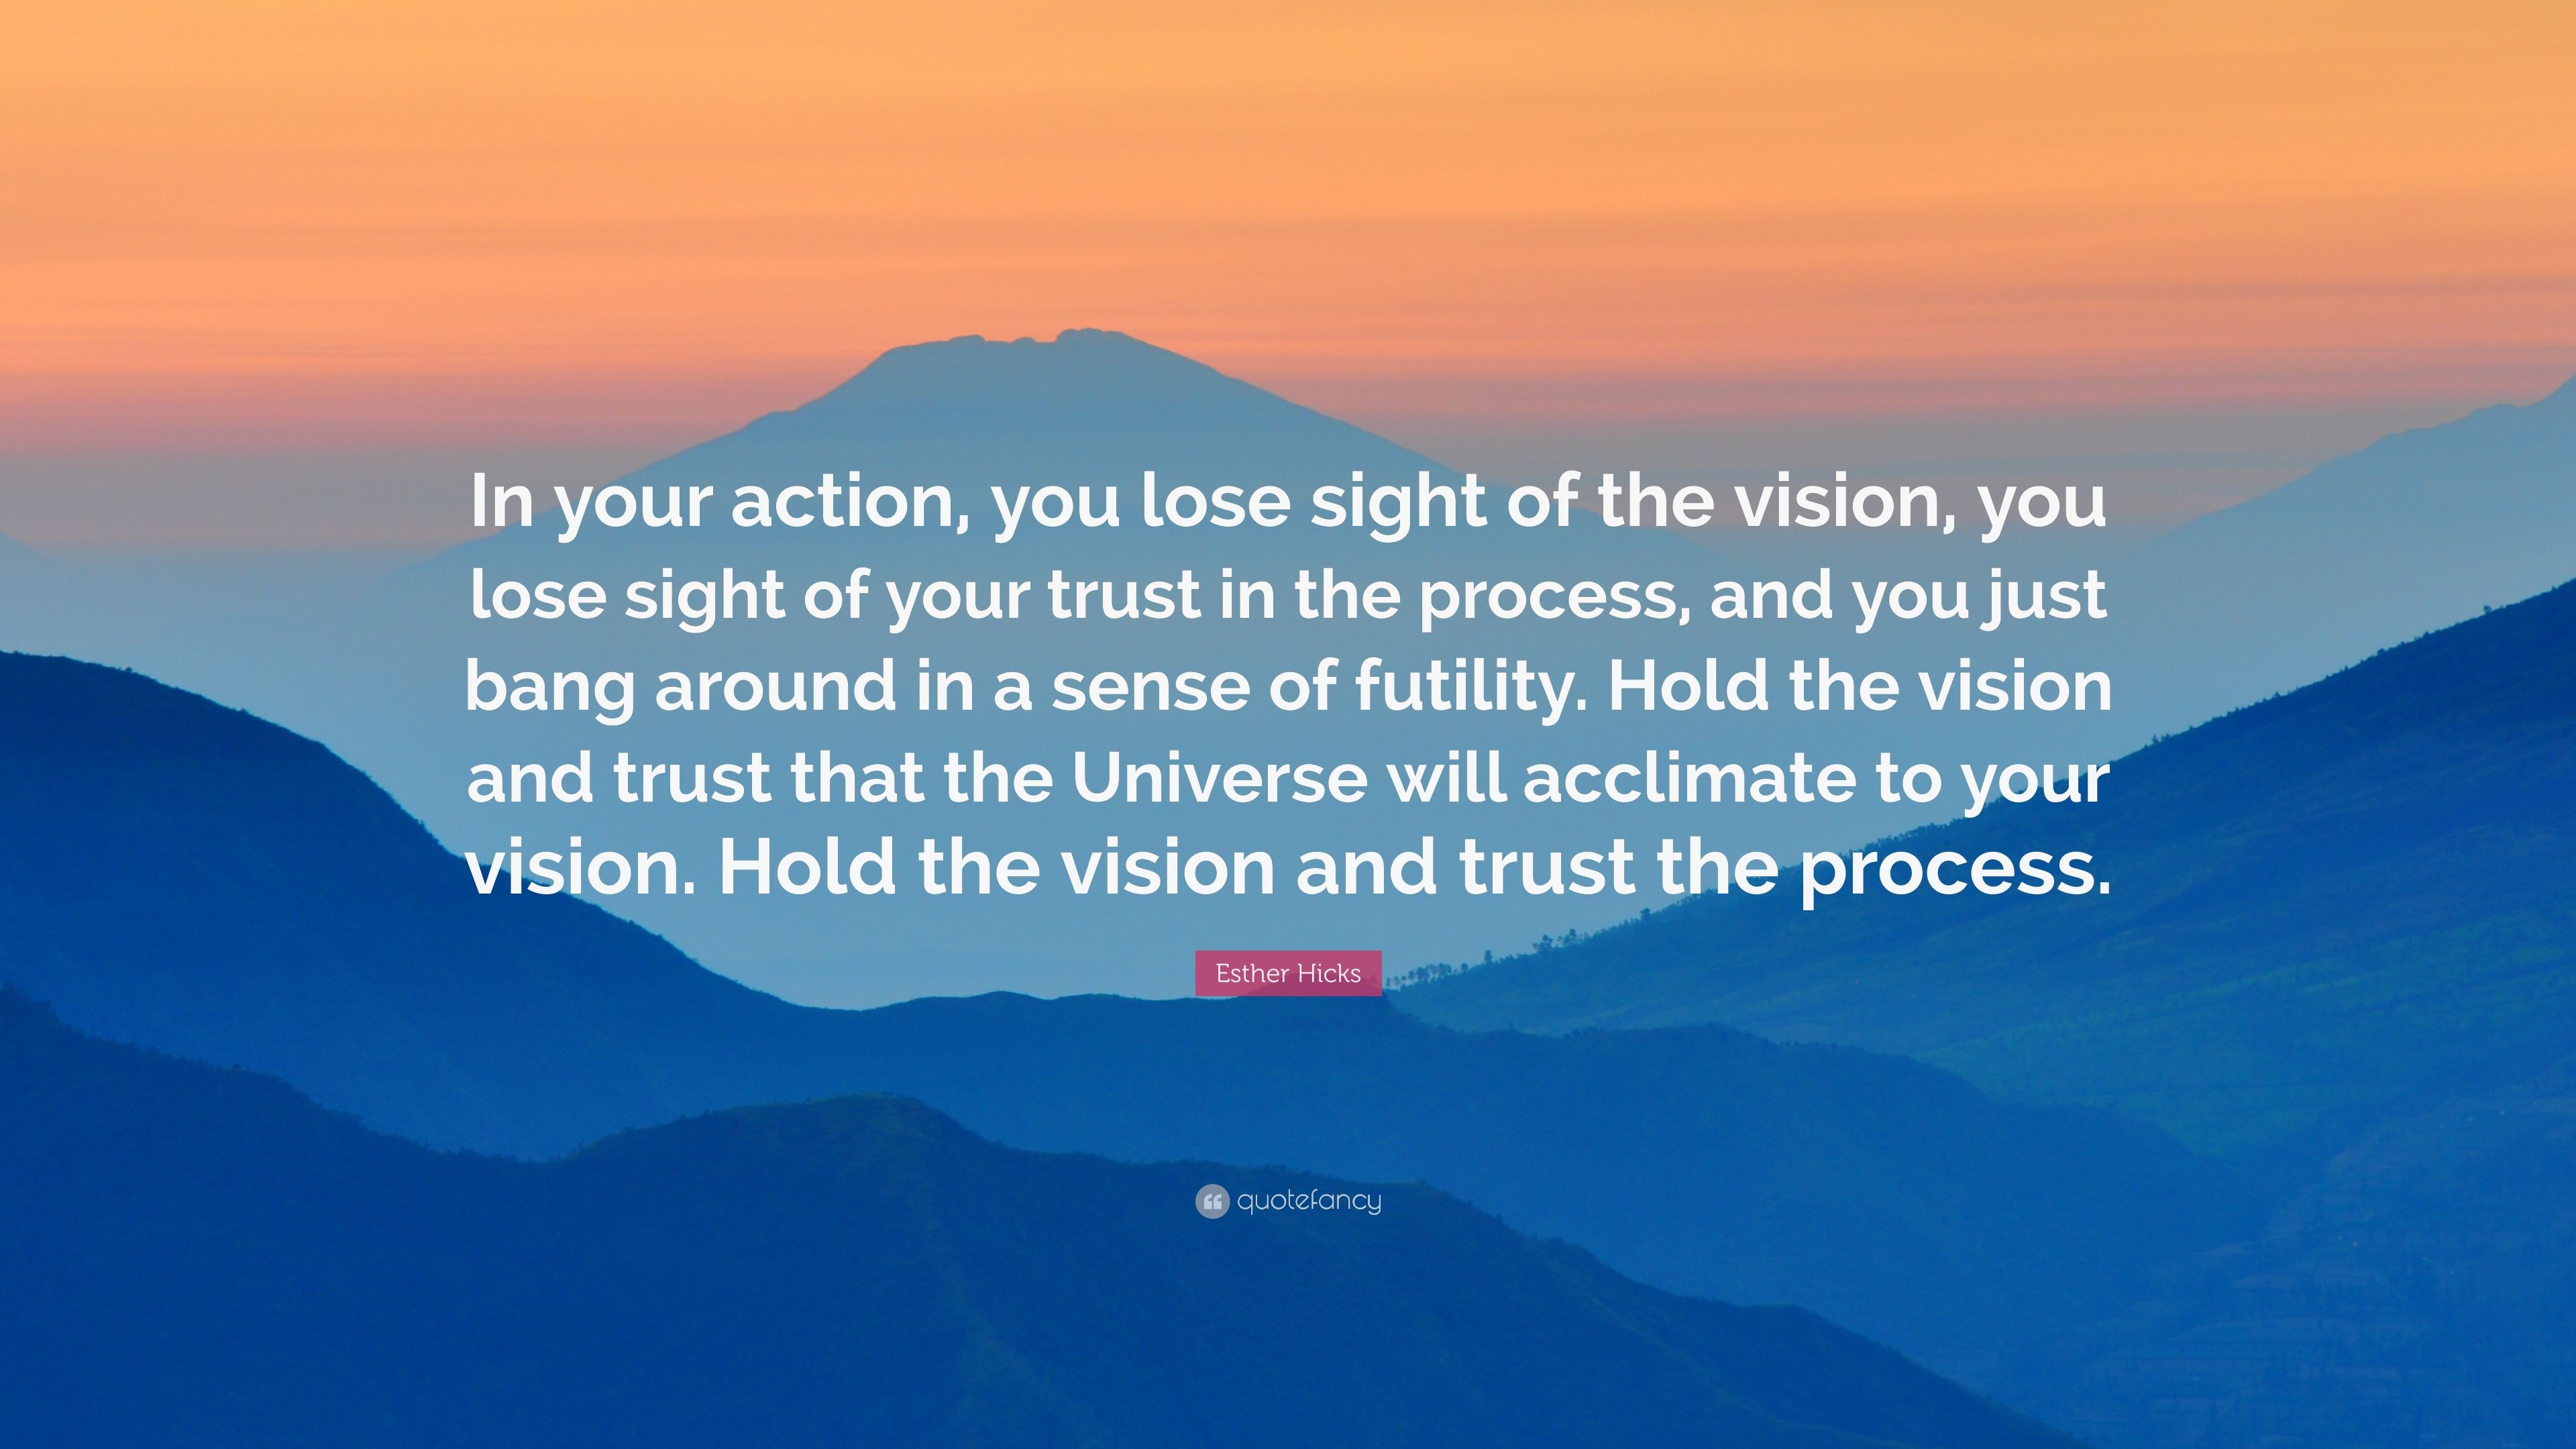 Esther Hicks Quote: “In your action, you lose sight of the vision, you lose sight of your trust in the process, and you just bang around in a.” (10 wallpaper)